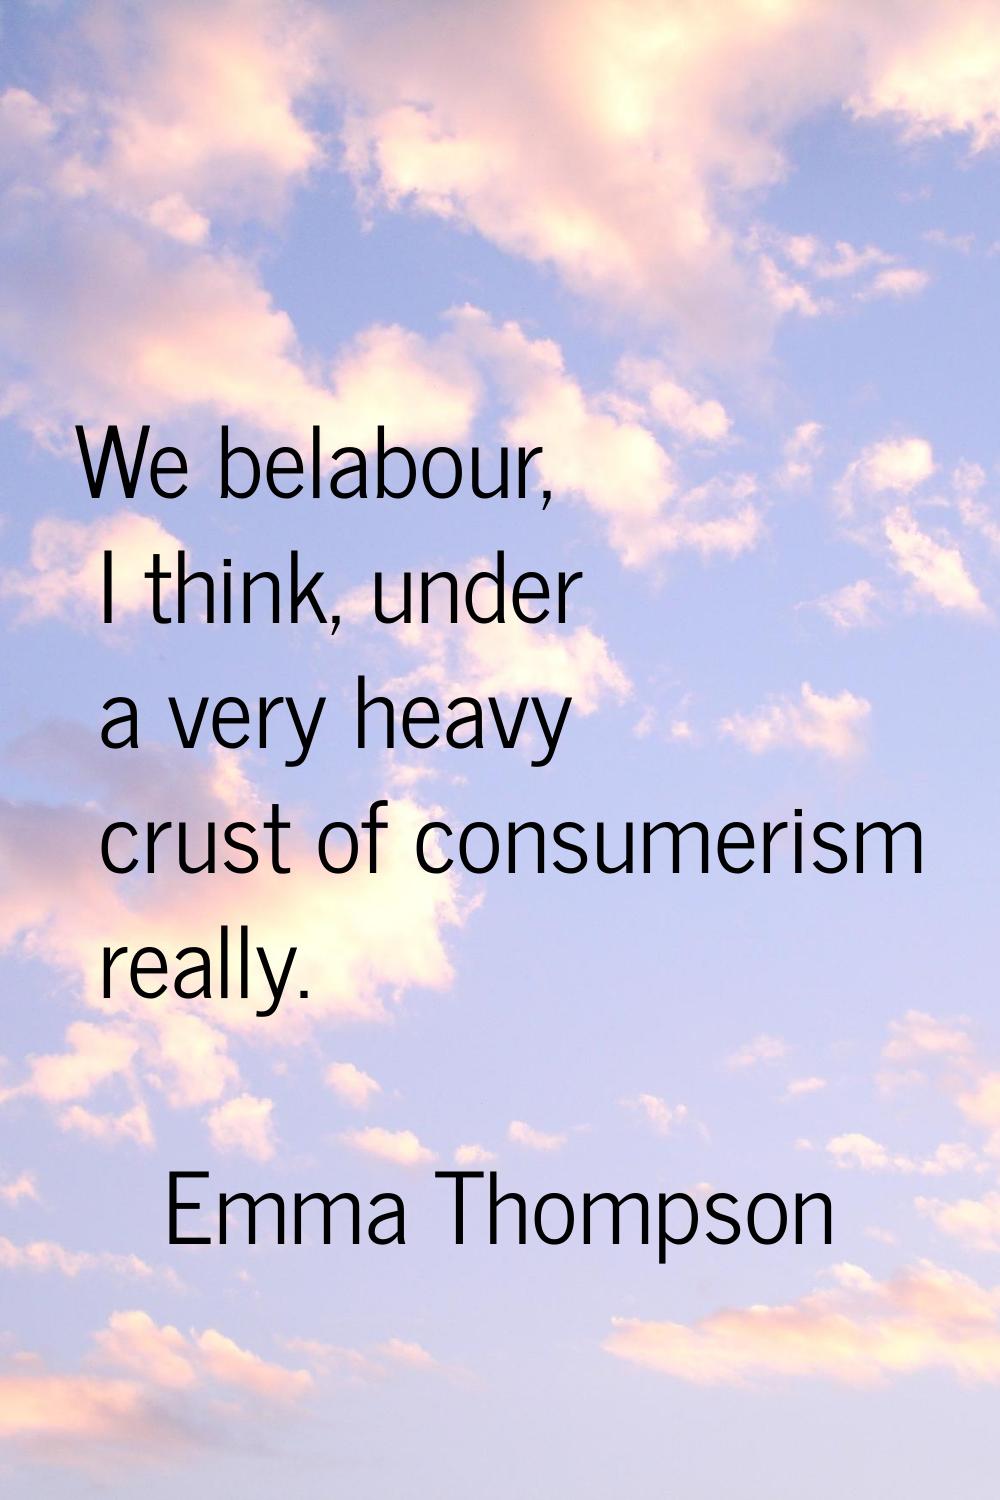 We belabour, I think, under a very heavy crust of consumerism really.